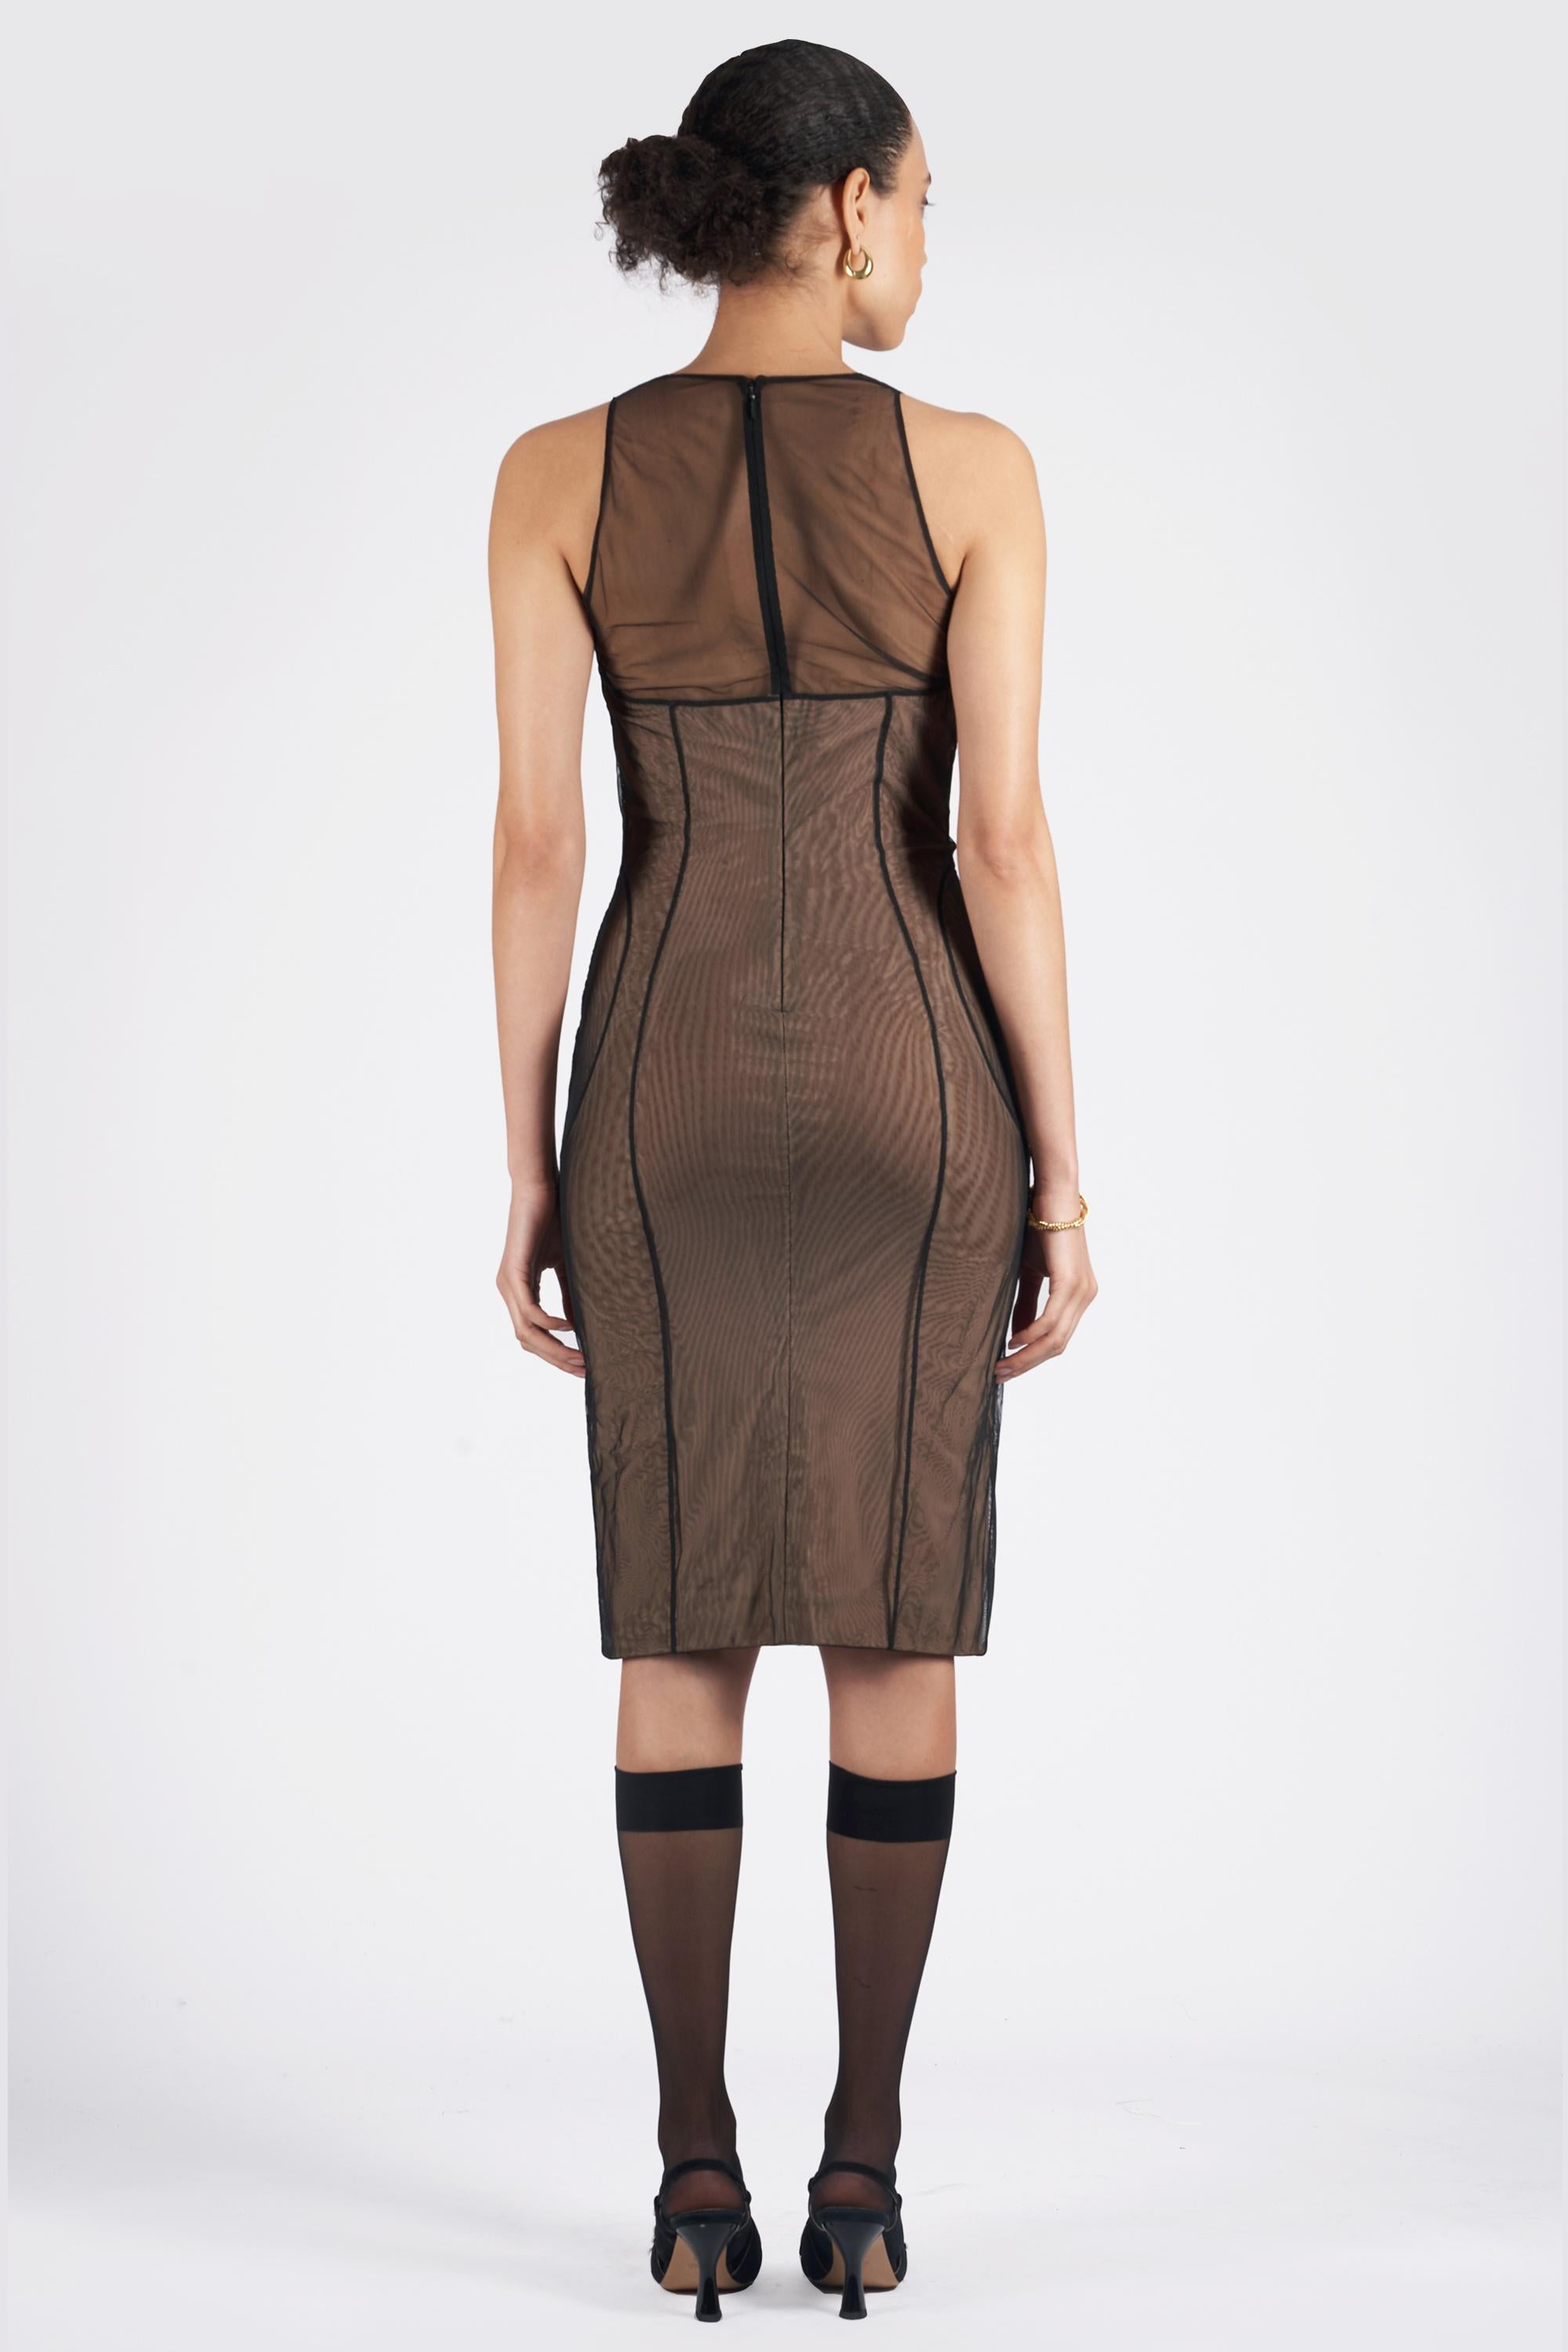 We are excited to present this incredibly rare Gucci by Tom Ford Spring Summer 2001 bodycon corset dress. Features sheer tulle mesh covered bustier corset, scoop neck, structured bodice and concealed zip closure on the back. (Runway piece, look 2).